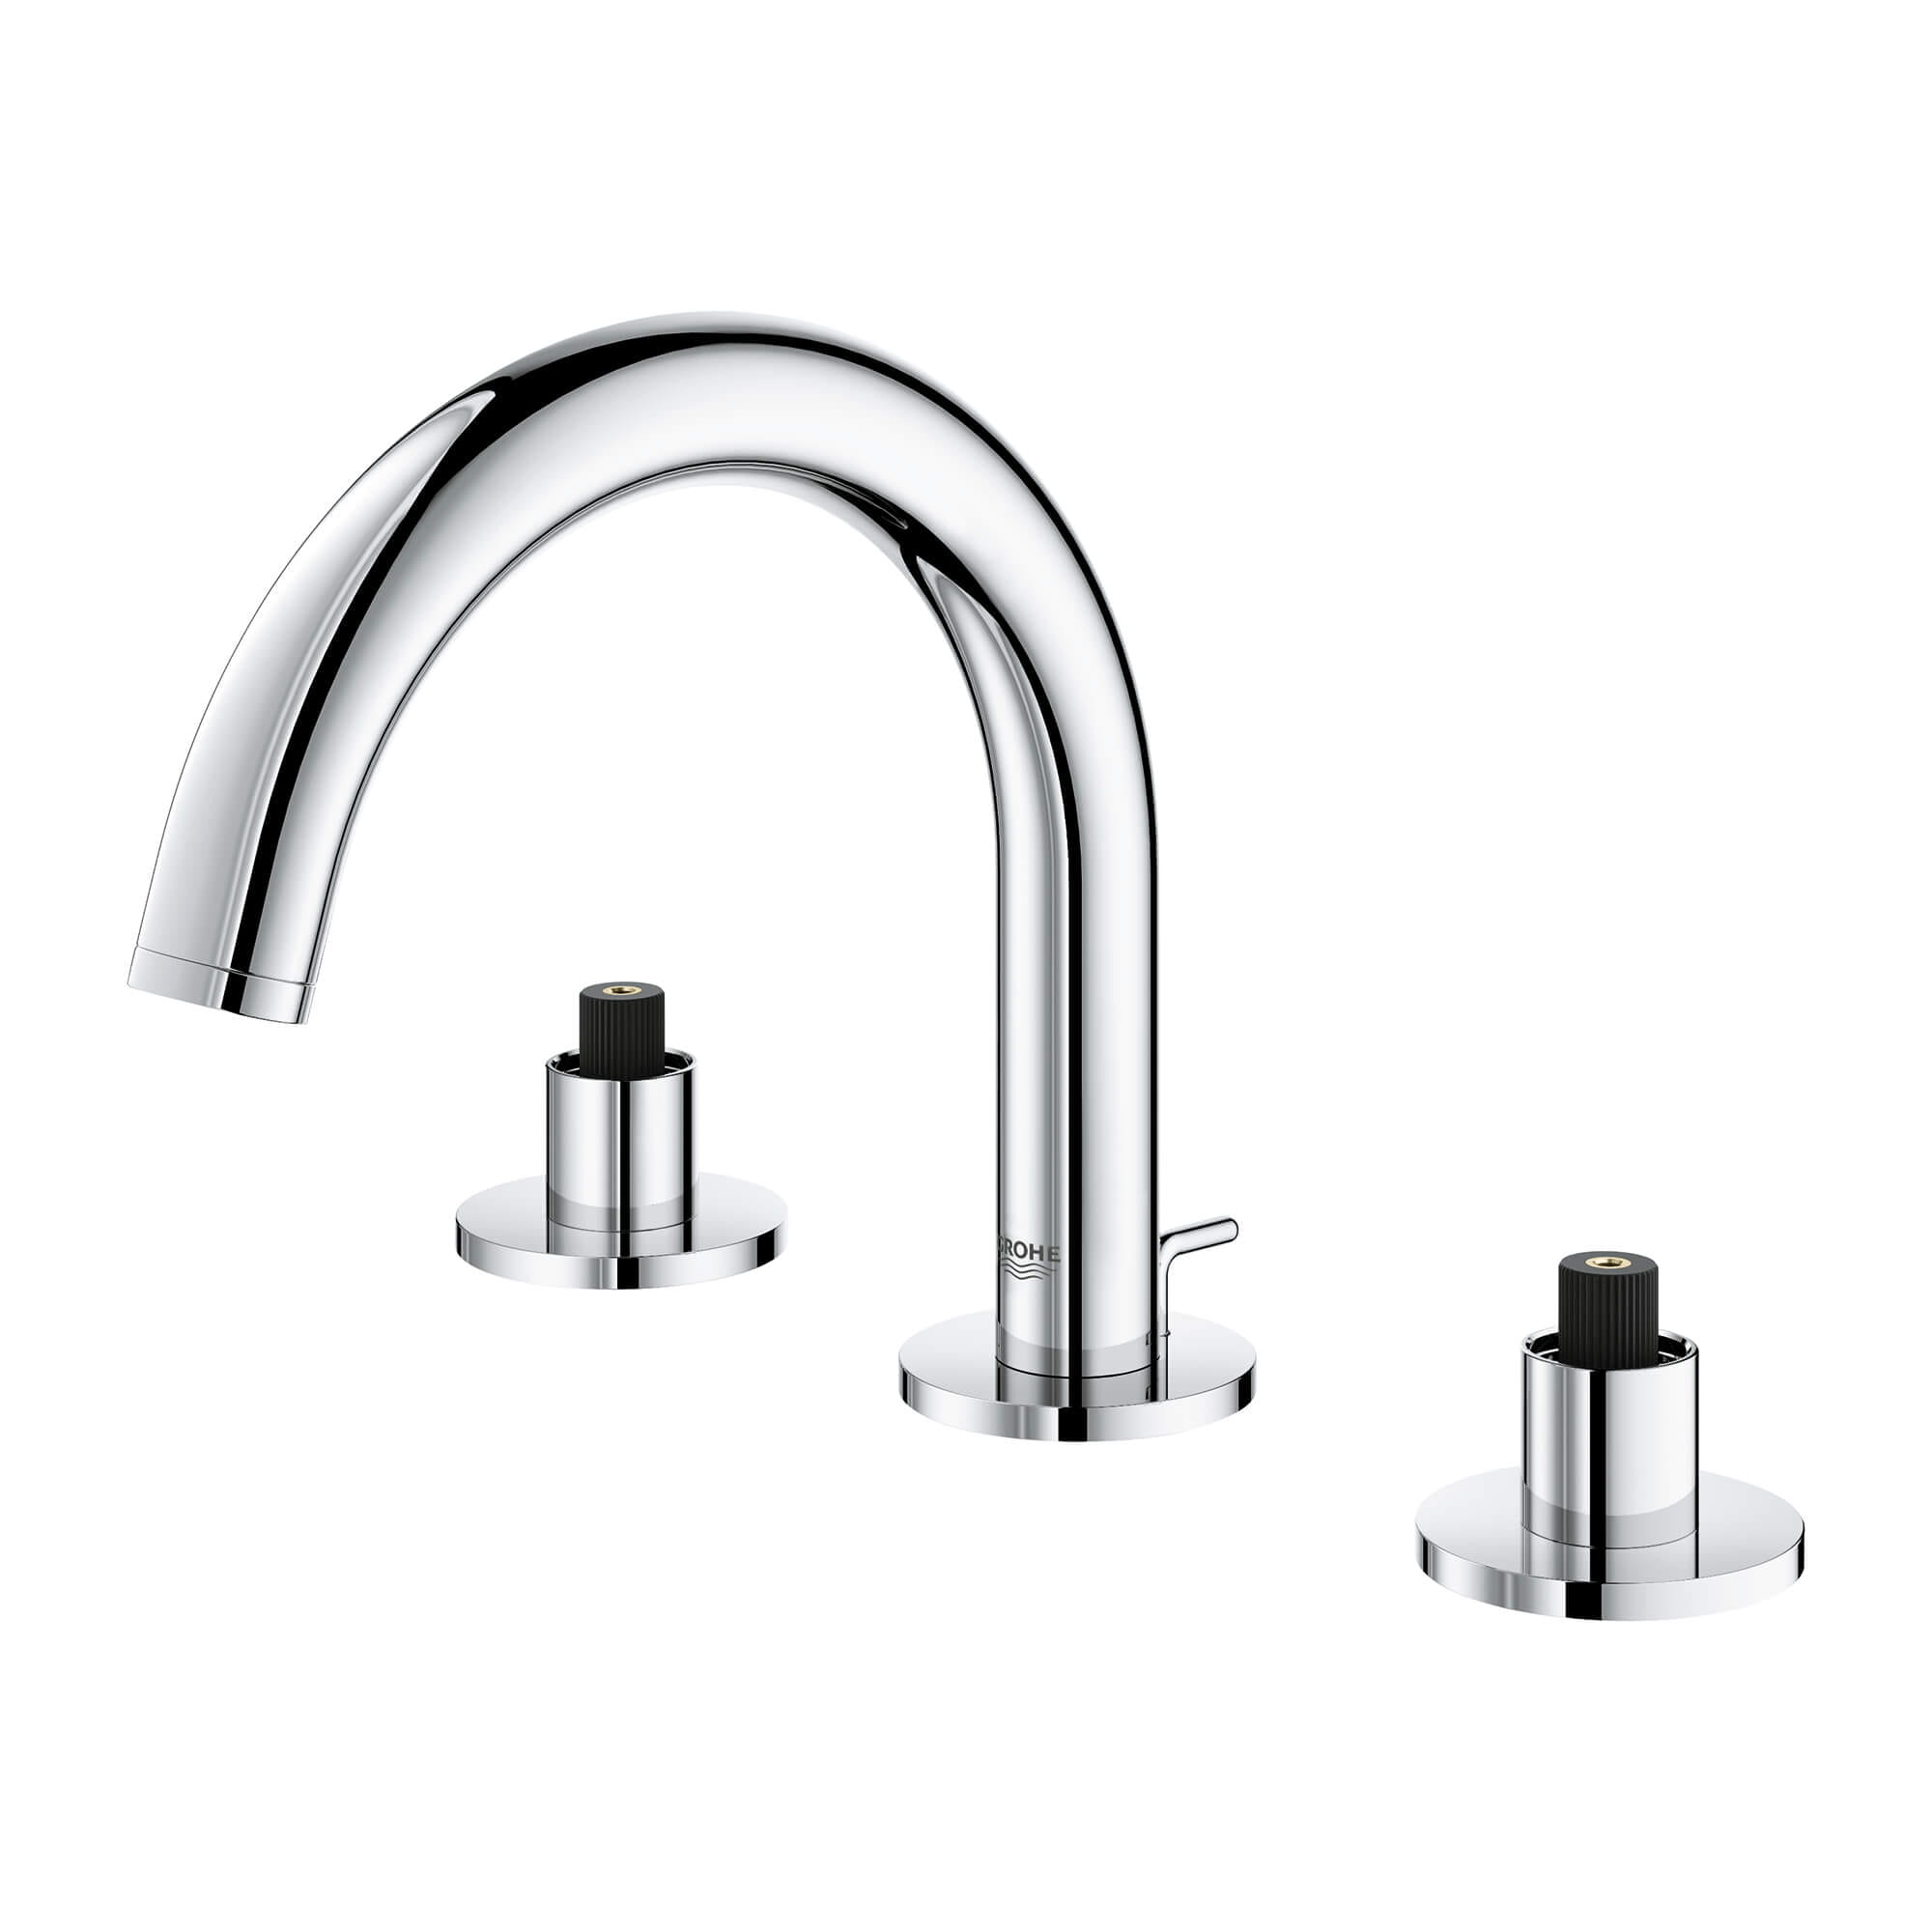 8-INCH WIDESPREAD 2-HANDLE S-SIZE BATHROOM FAUCET 1.2 GPM-1